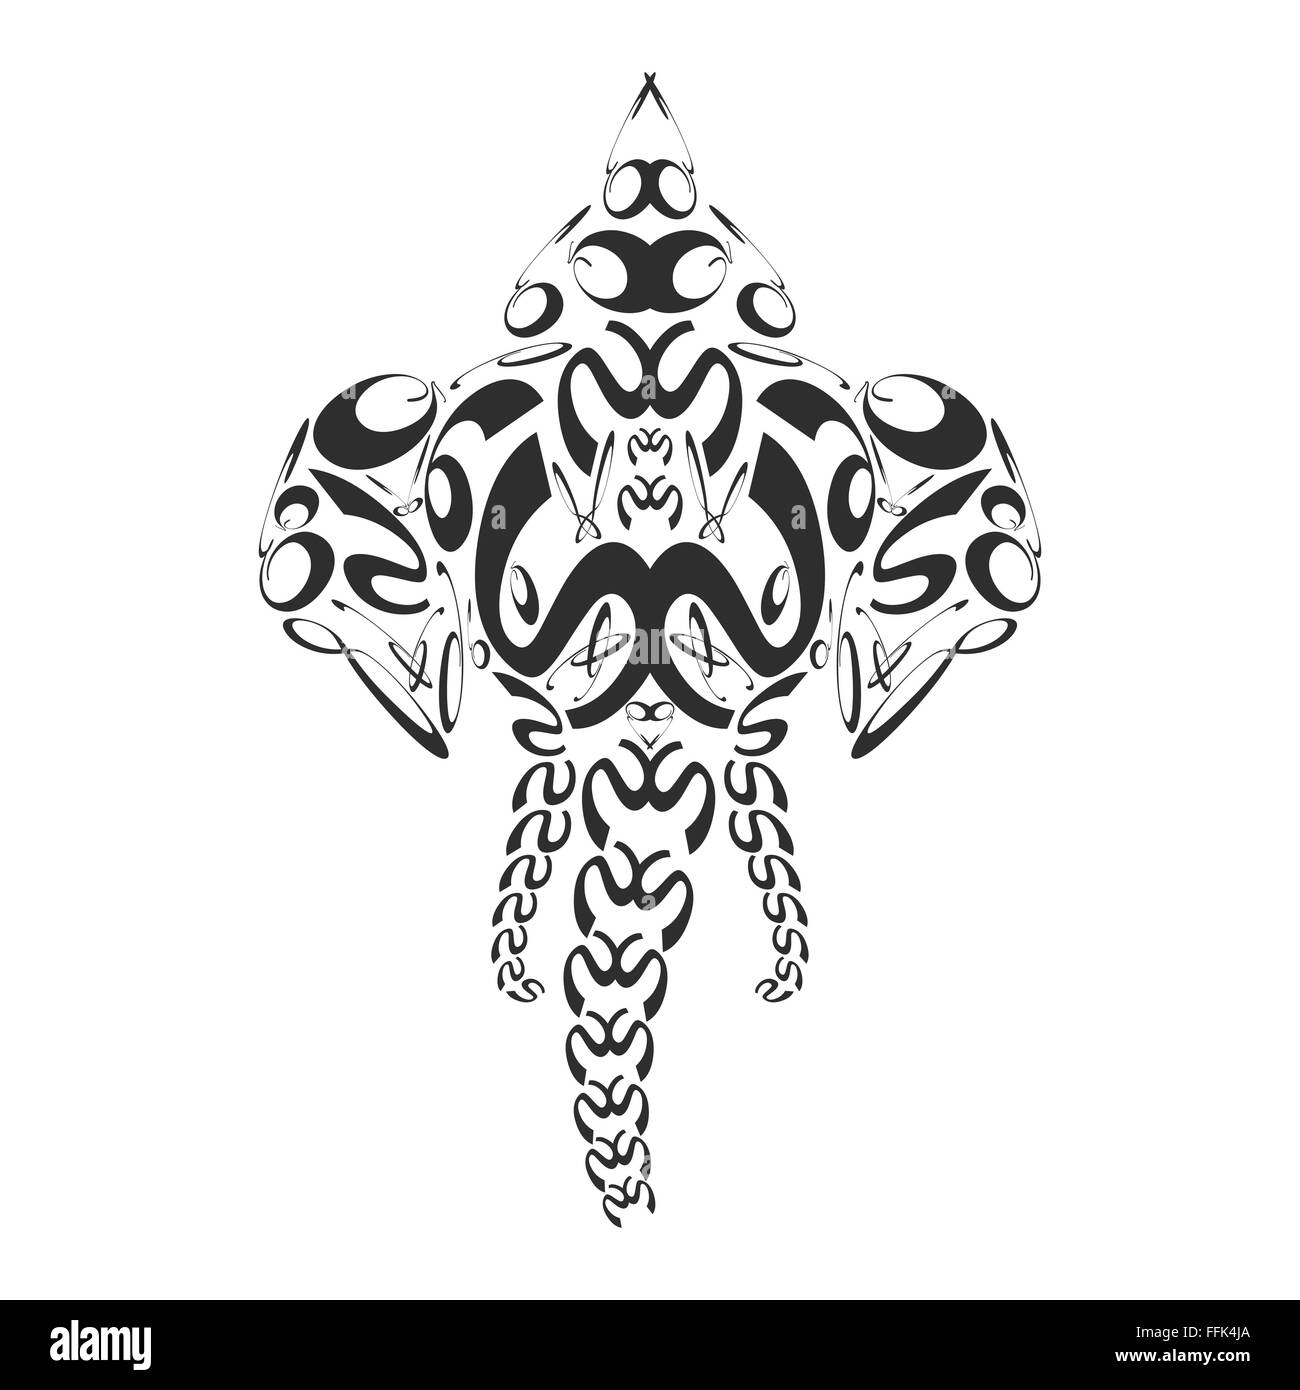 vector black monochrome abstract signs elephant head ganesh art illustration isolated white background Stock Vector